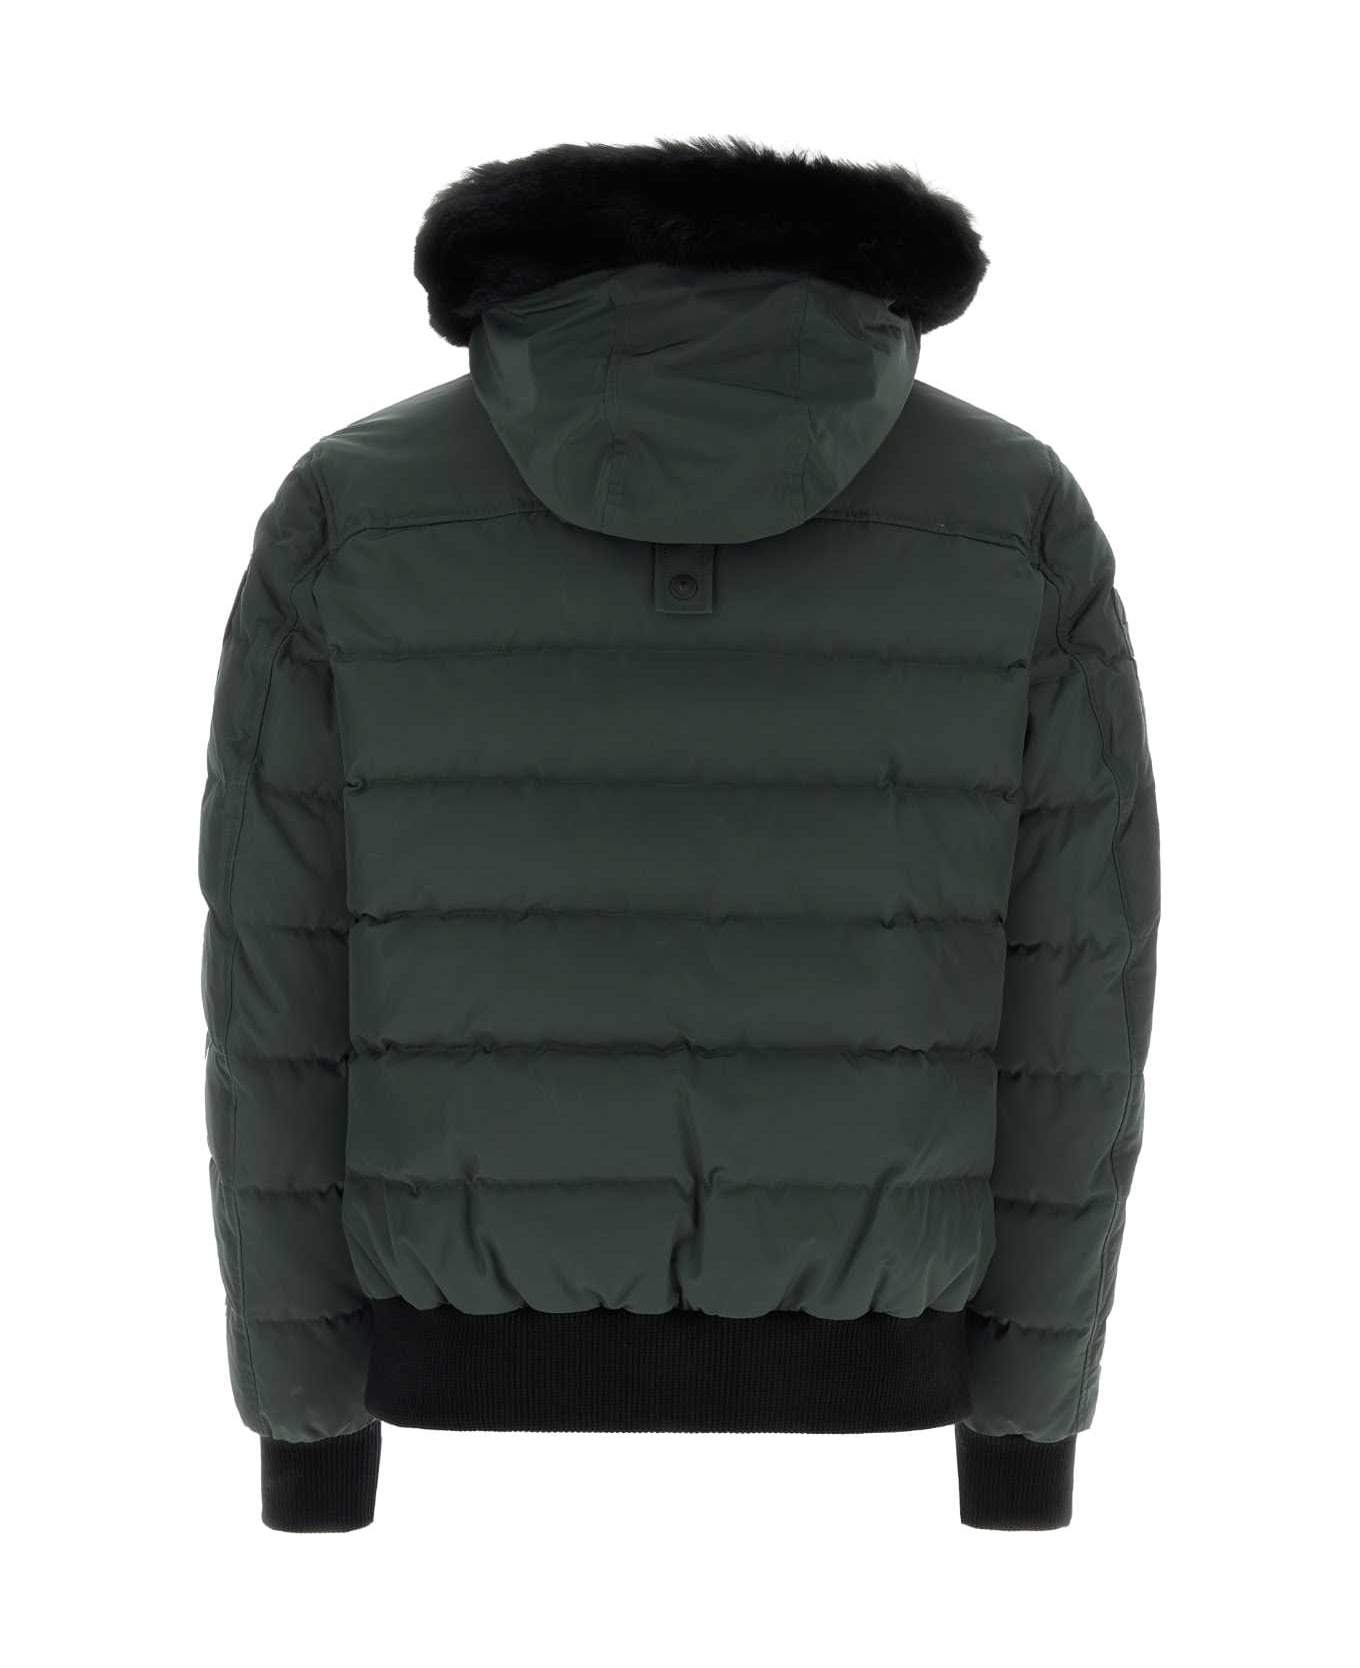 Moose Knuckles Dark Green Polyester Down Jacket - FOREST HILL